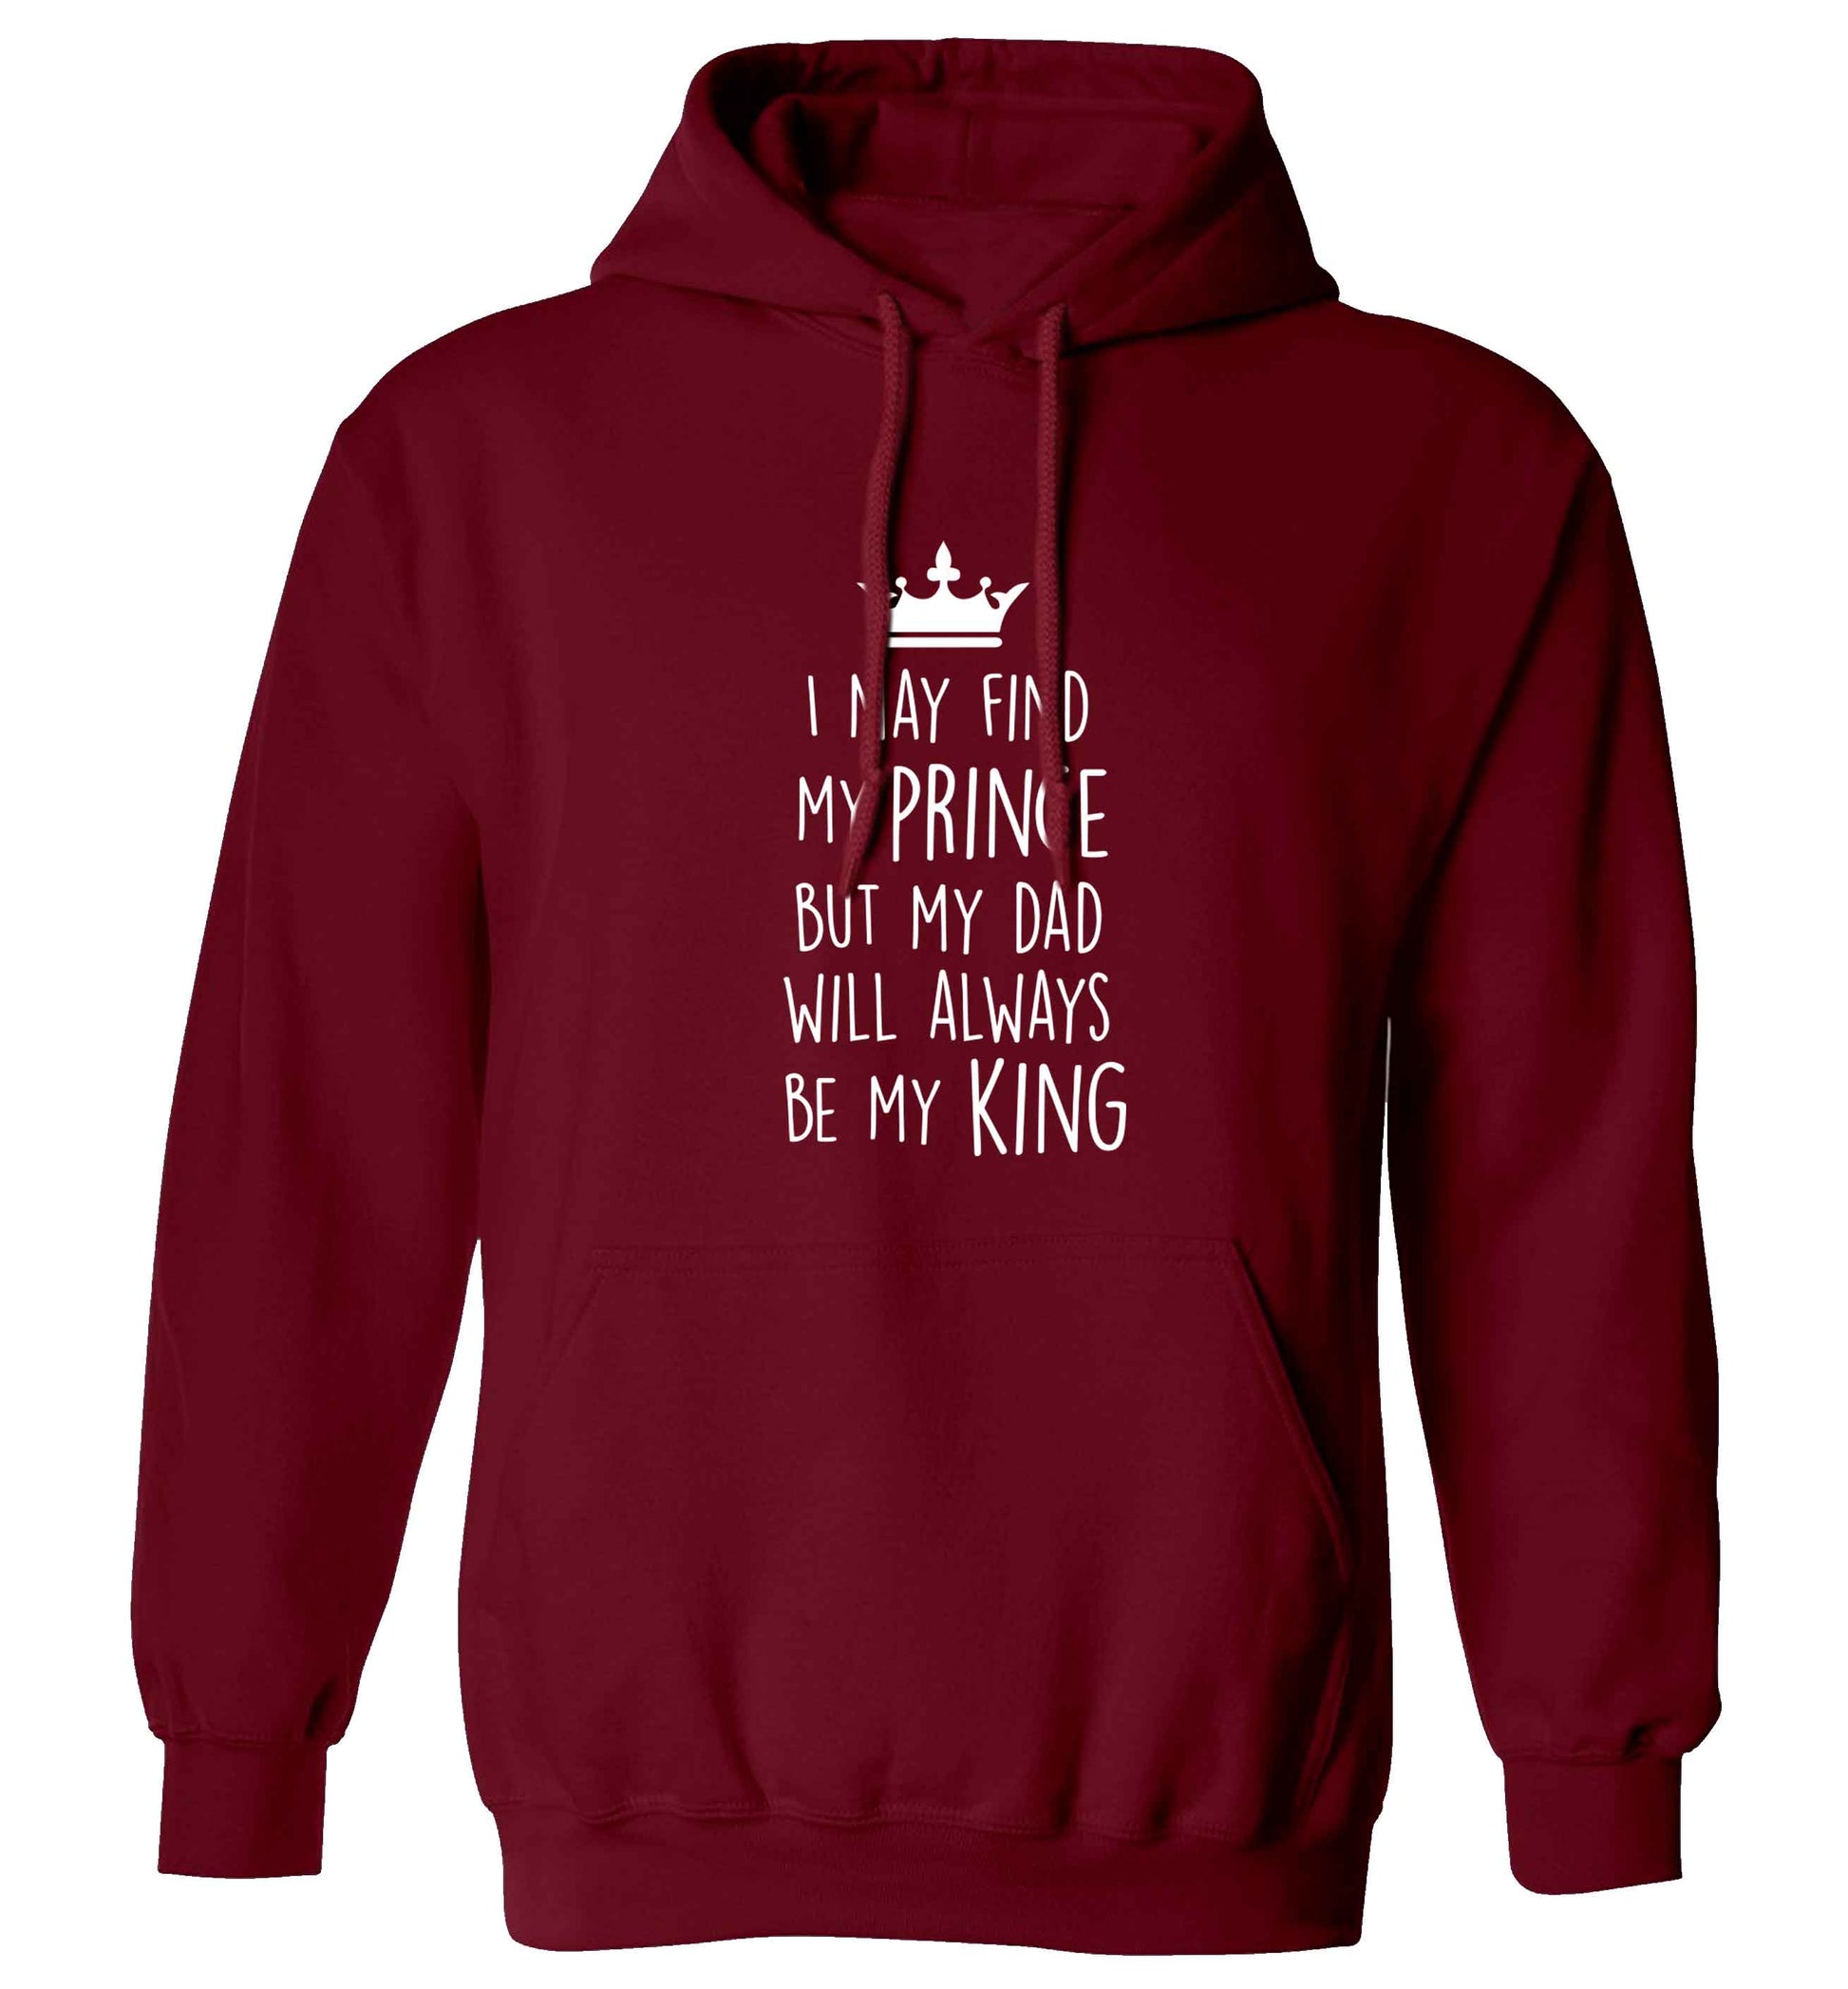 I may find my prince but my dad will always be my king adults unisex maroon hoodie 2XL